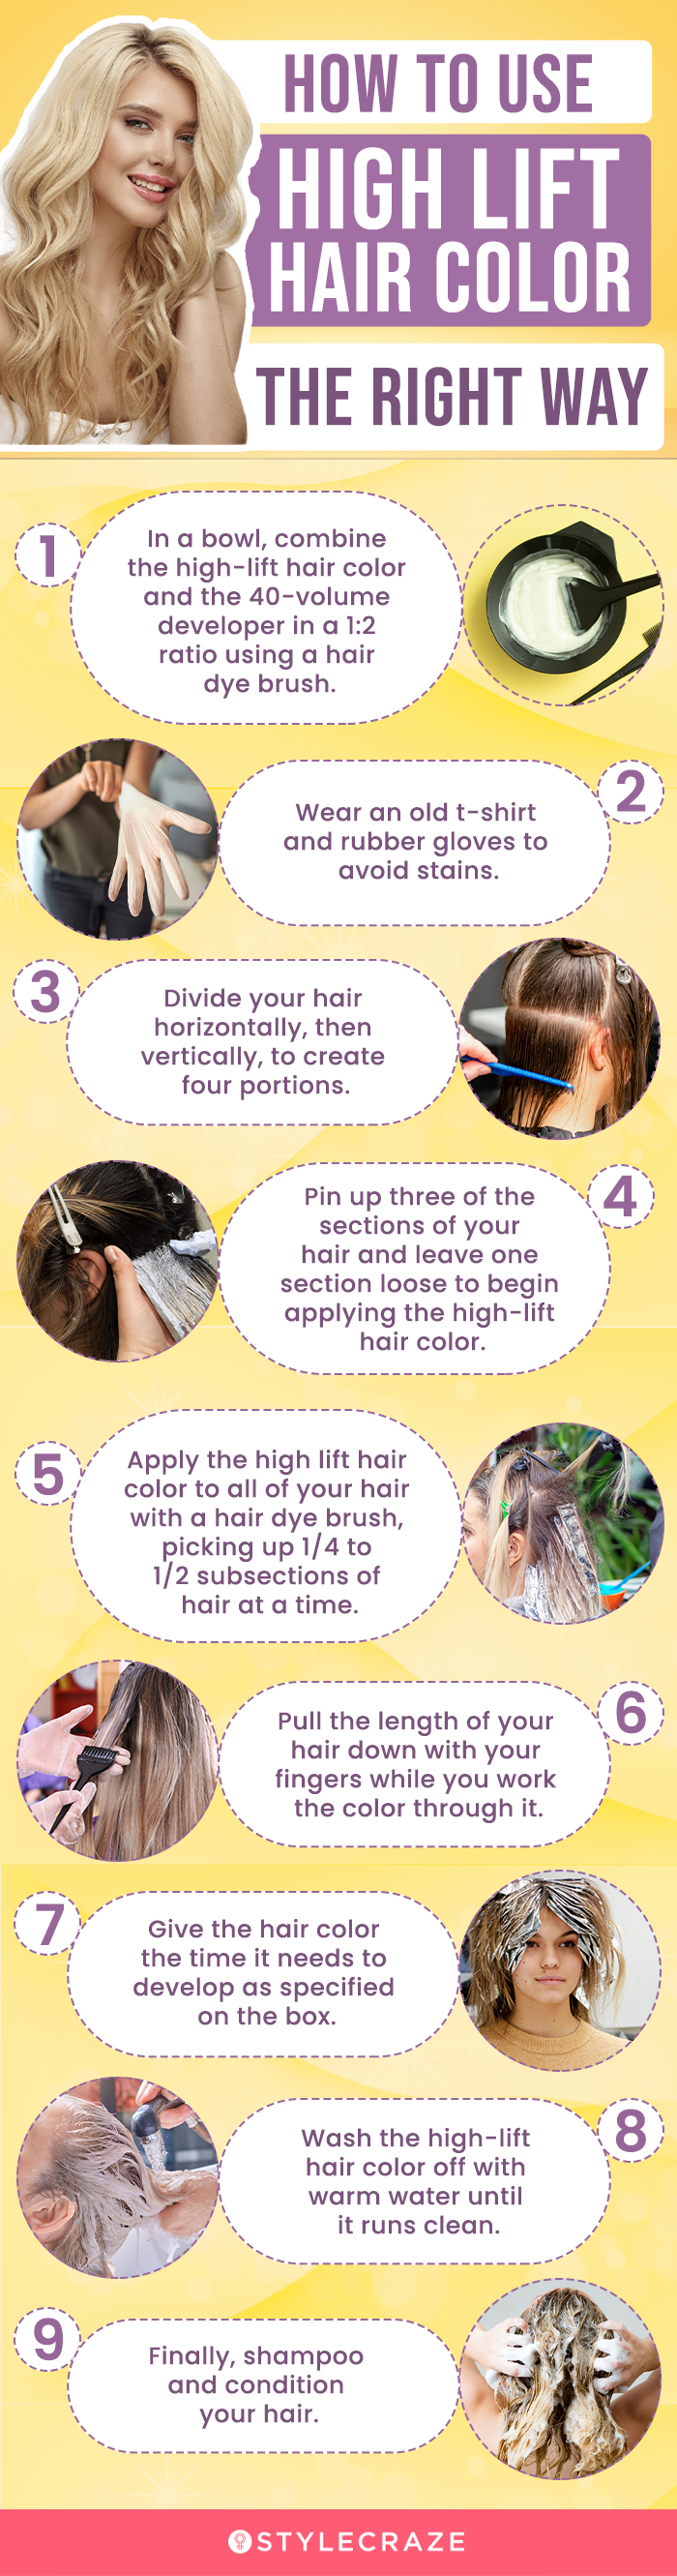 how to use high lift hair color the right way (infographic)